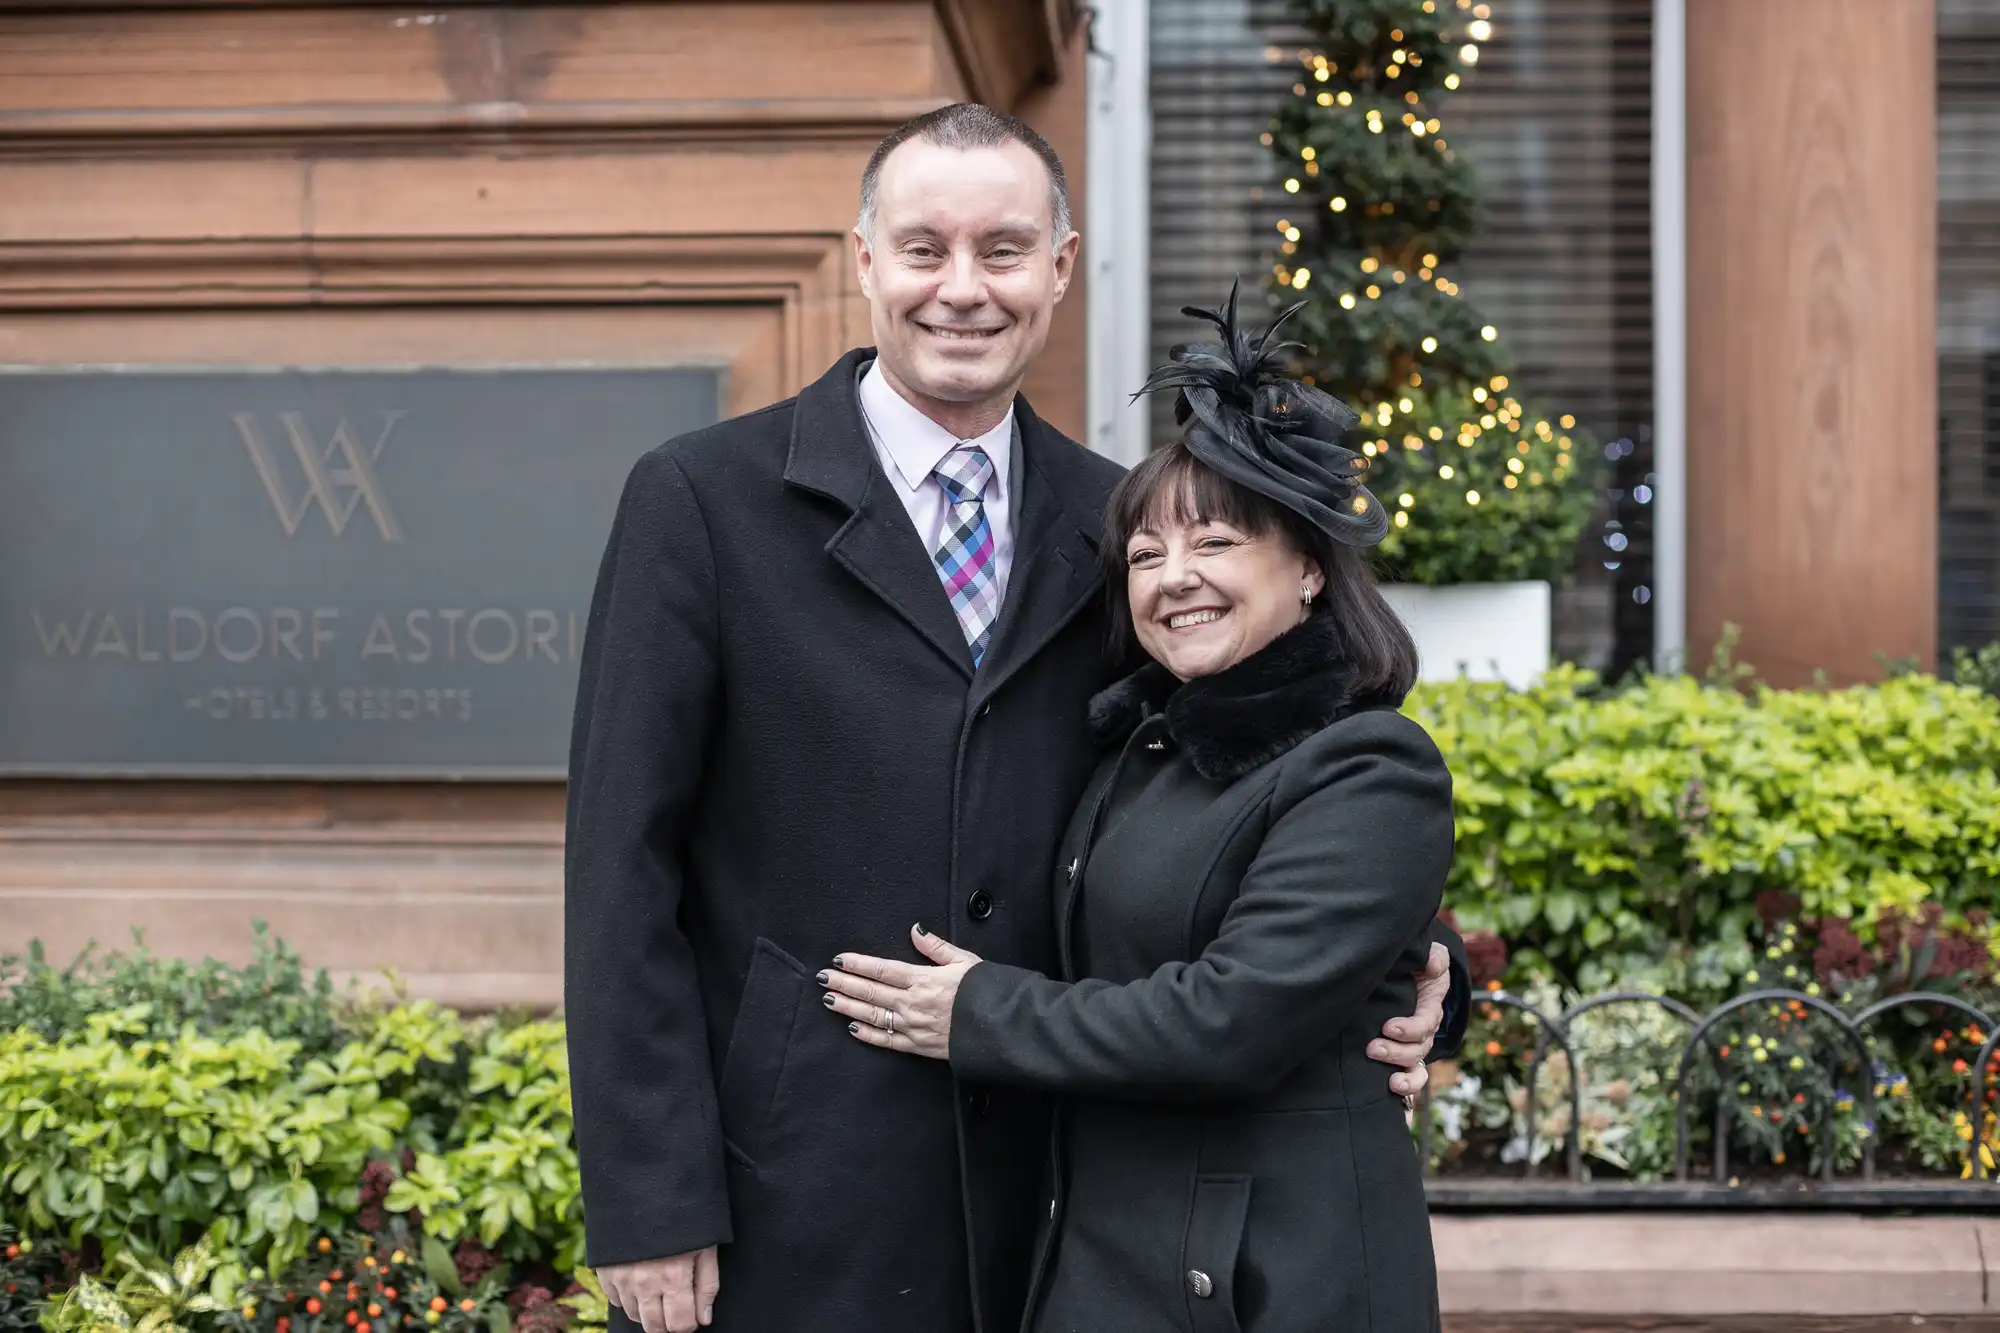 A man and a woman, both dressed in coats, pose and smile together in front of a Waldorf Astoria Hotels & Resorts sign, with greenery and a festive decoration in the background.